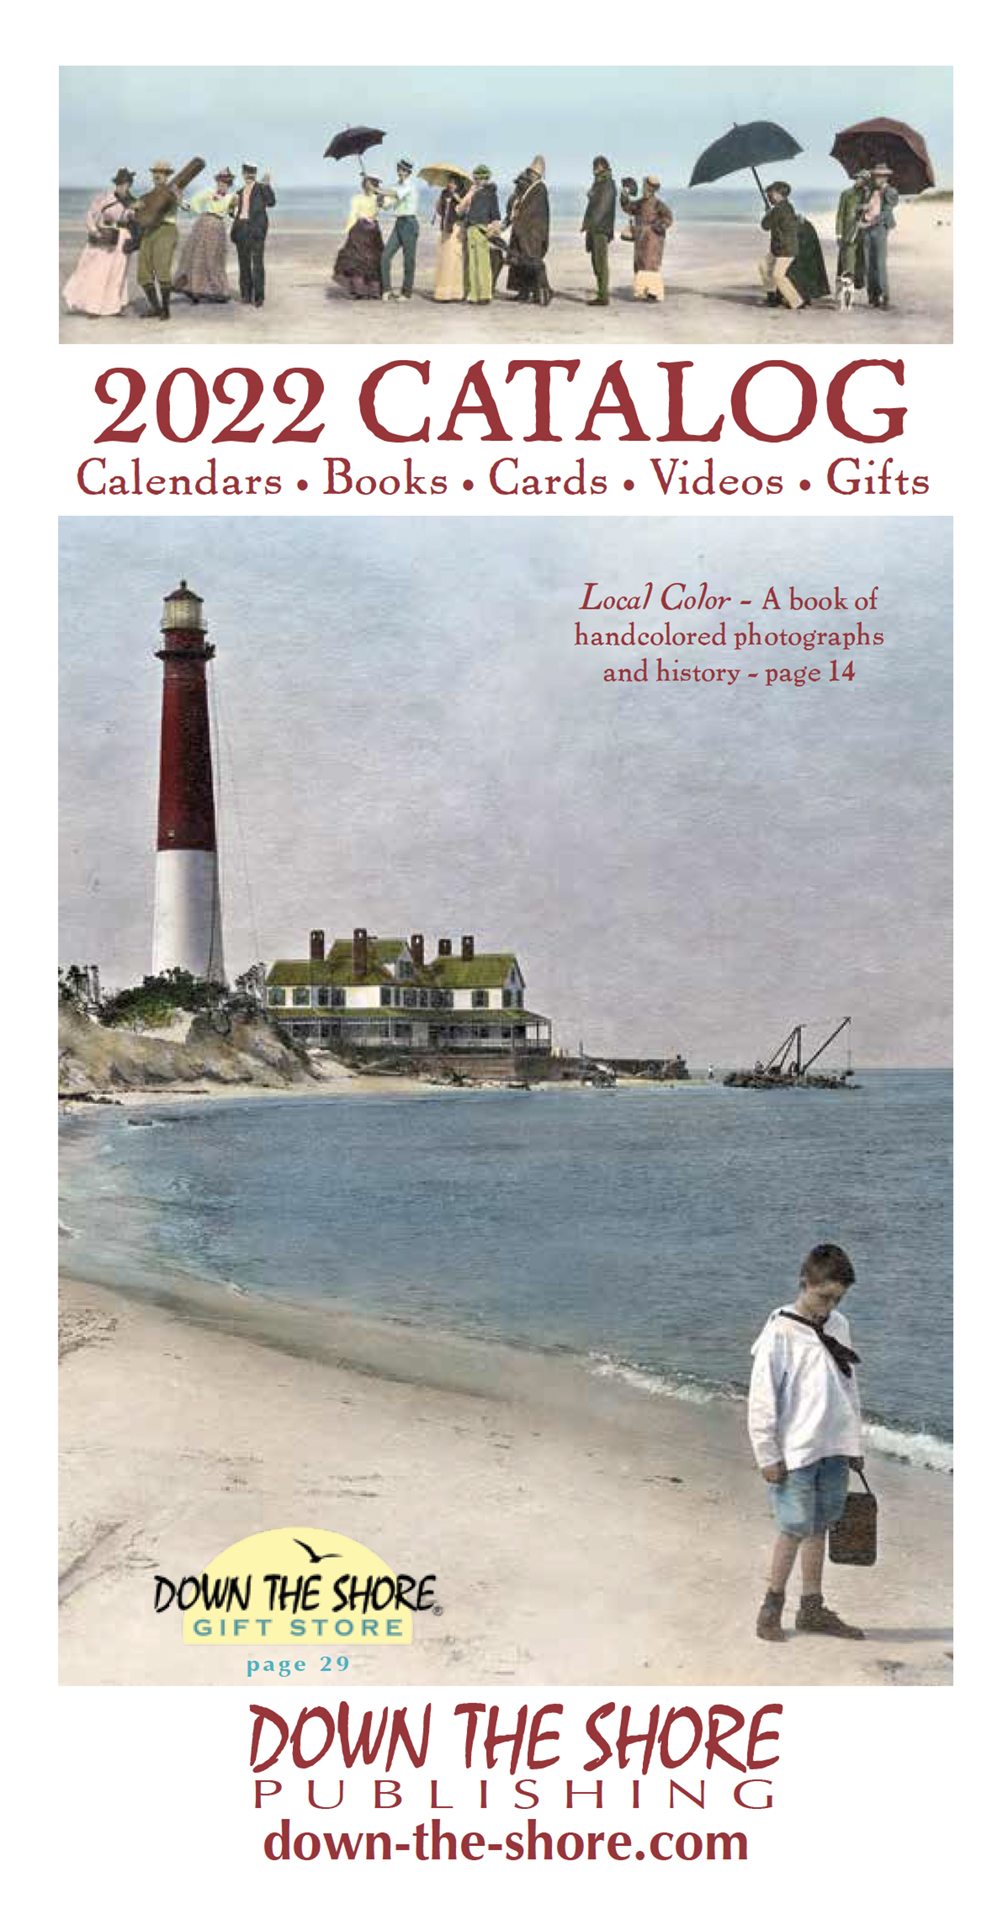 down-the-shore-publishing-books-calendars-videos-and-cards-about-the-jersey-shore